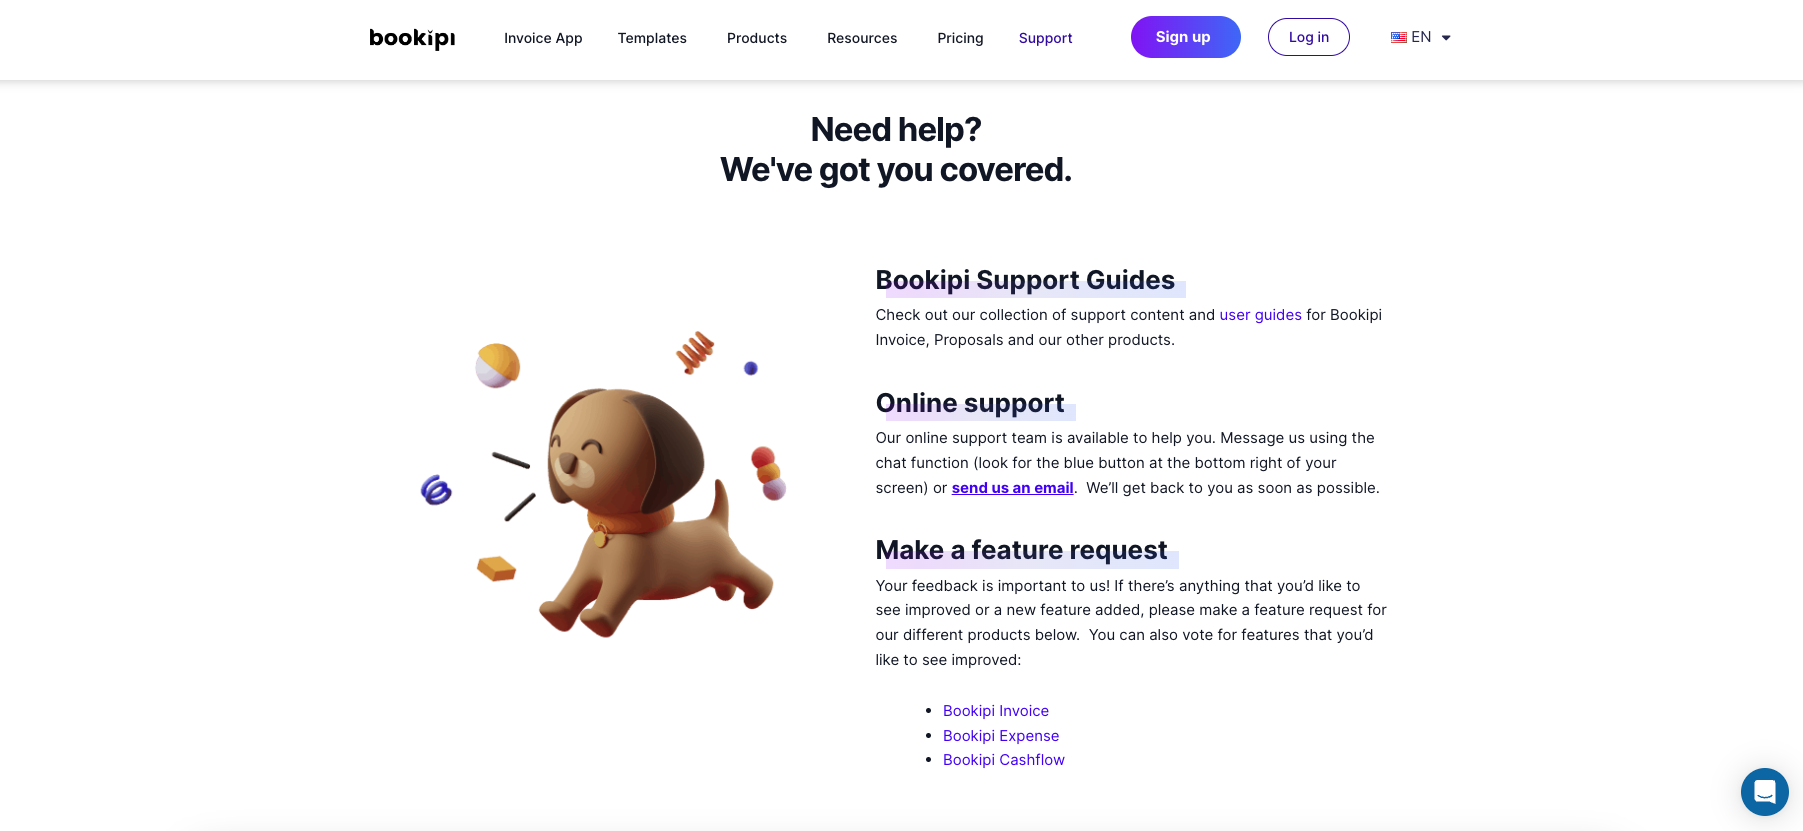 screenshot if bookipi support page